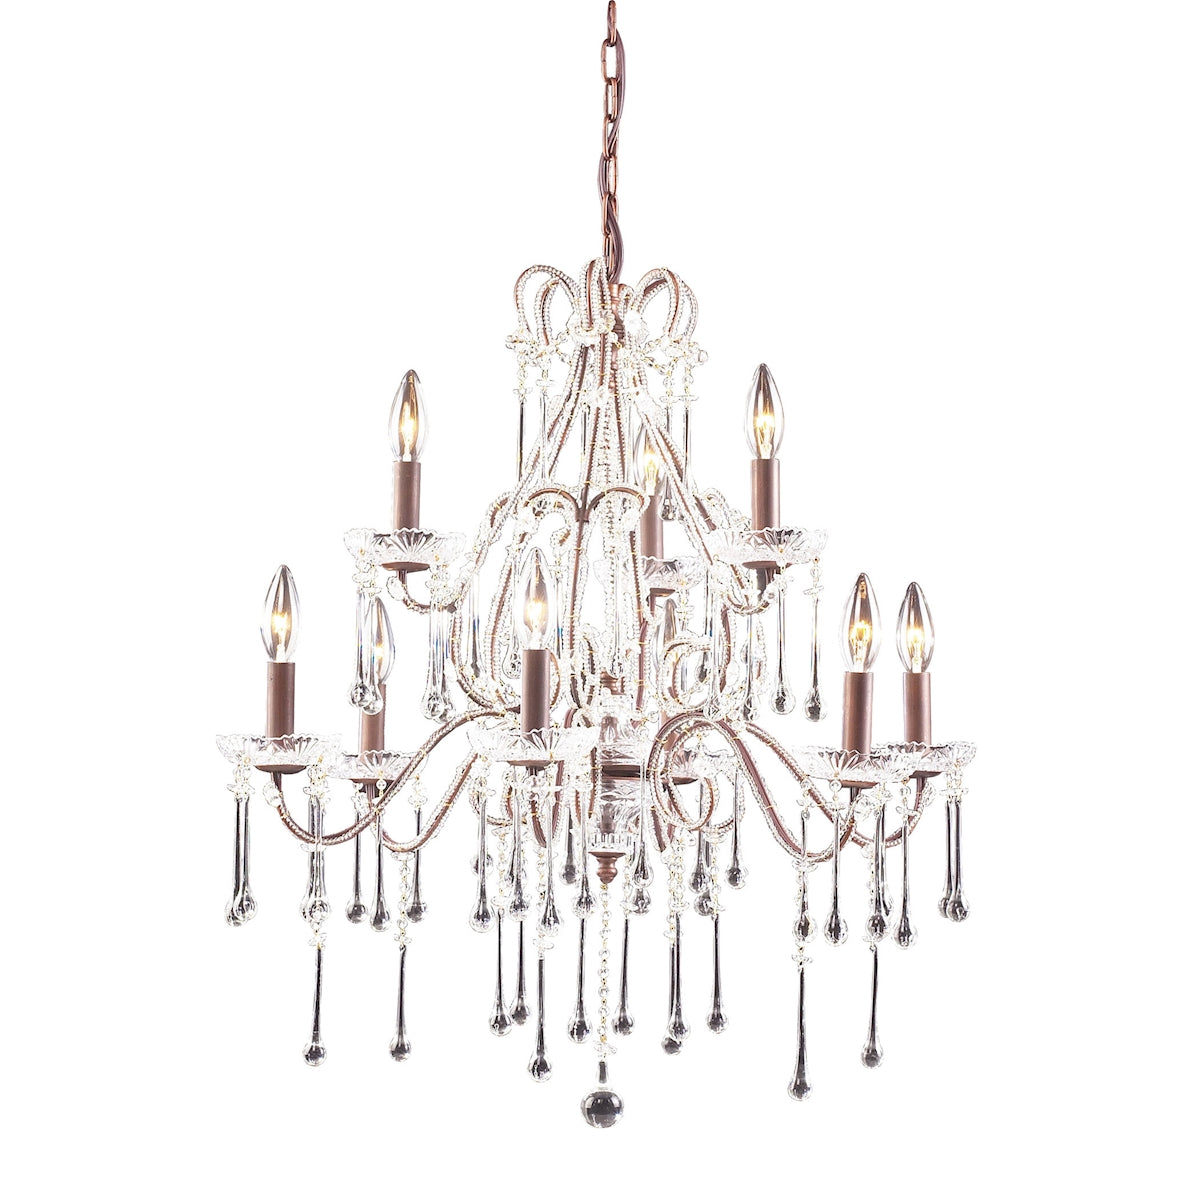 ELK Lighting 4013/6+3CL - Opulence 25" Wide 9-Light Chandelier in Rust with Clear Crystals